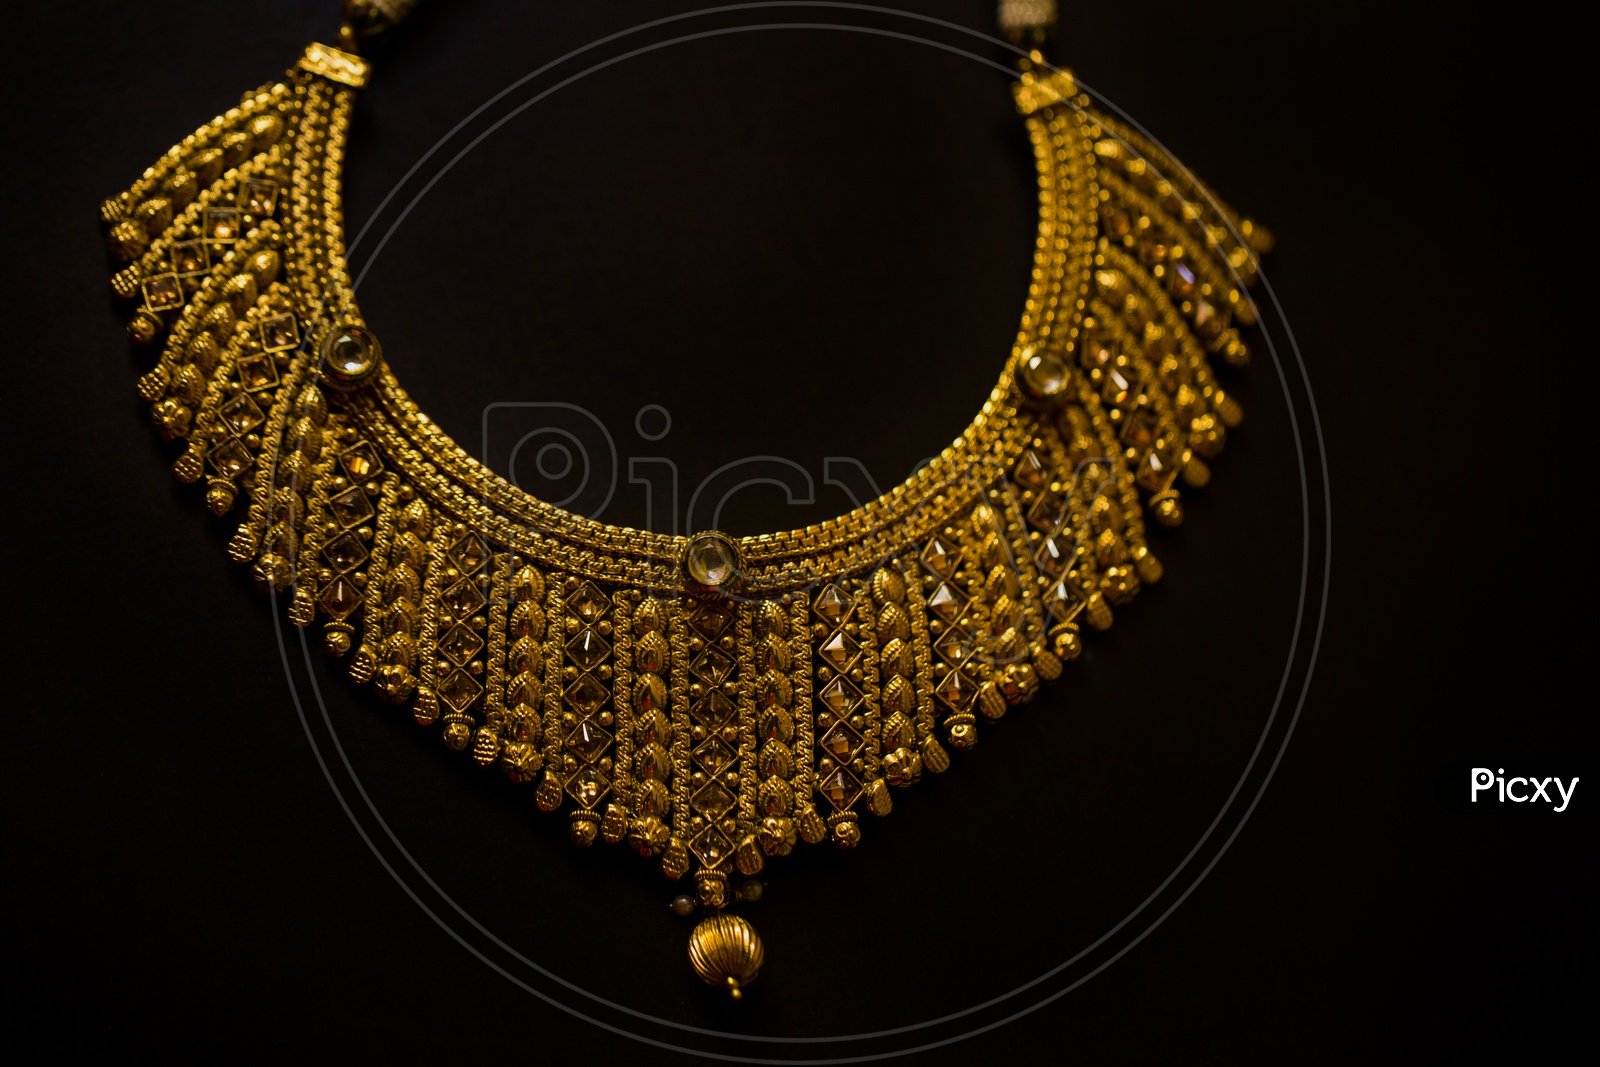 Indian Traditionally Made Designs For Bridal Collection of Gold Jewellery Necklace Closeup Shot